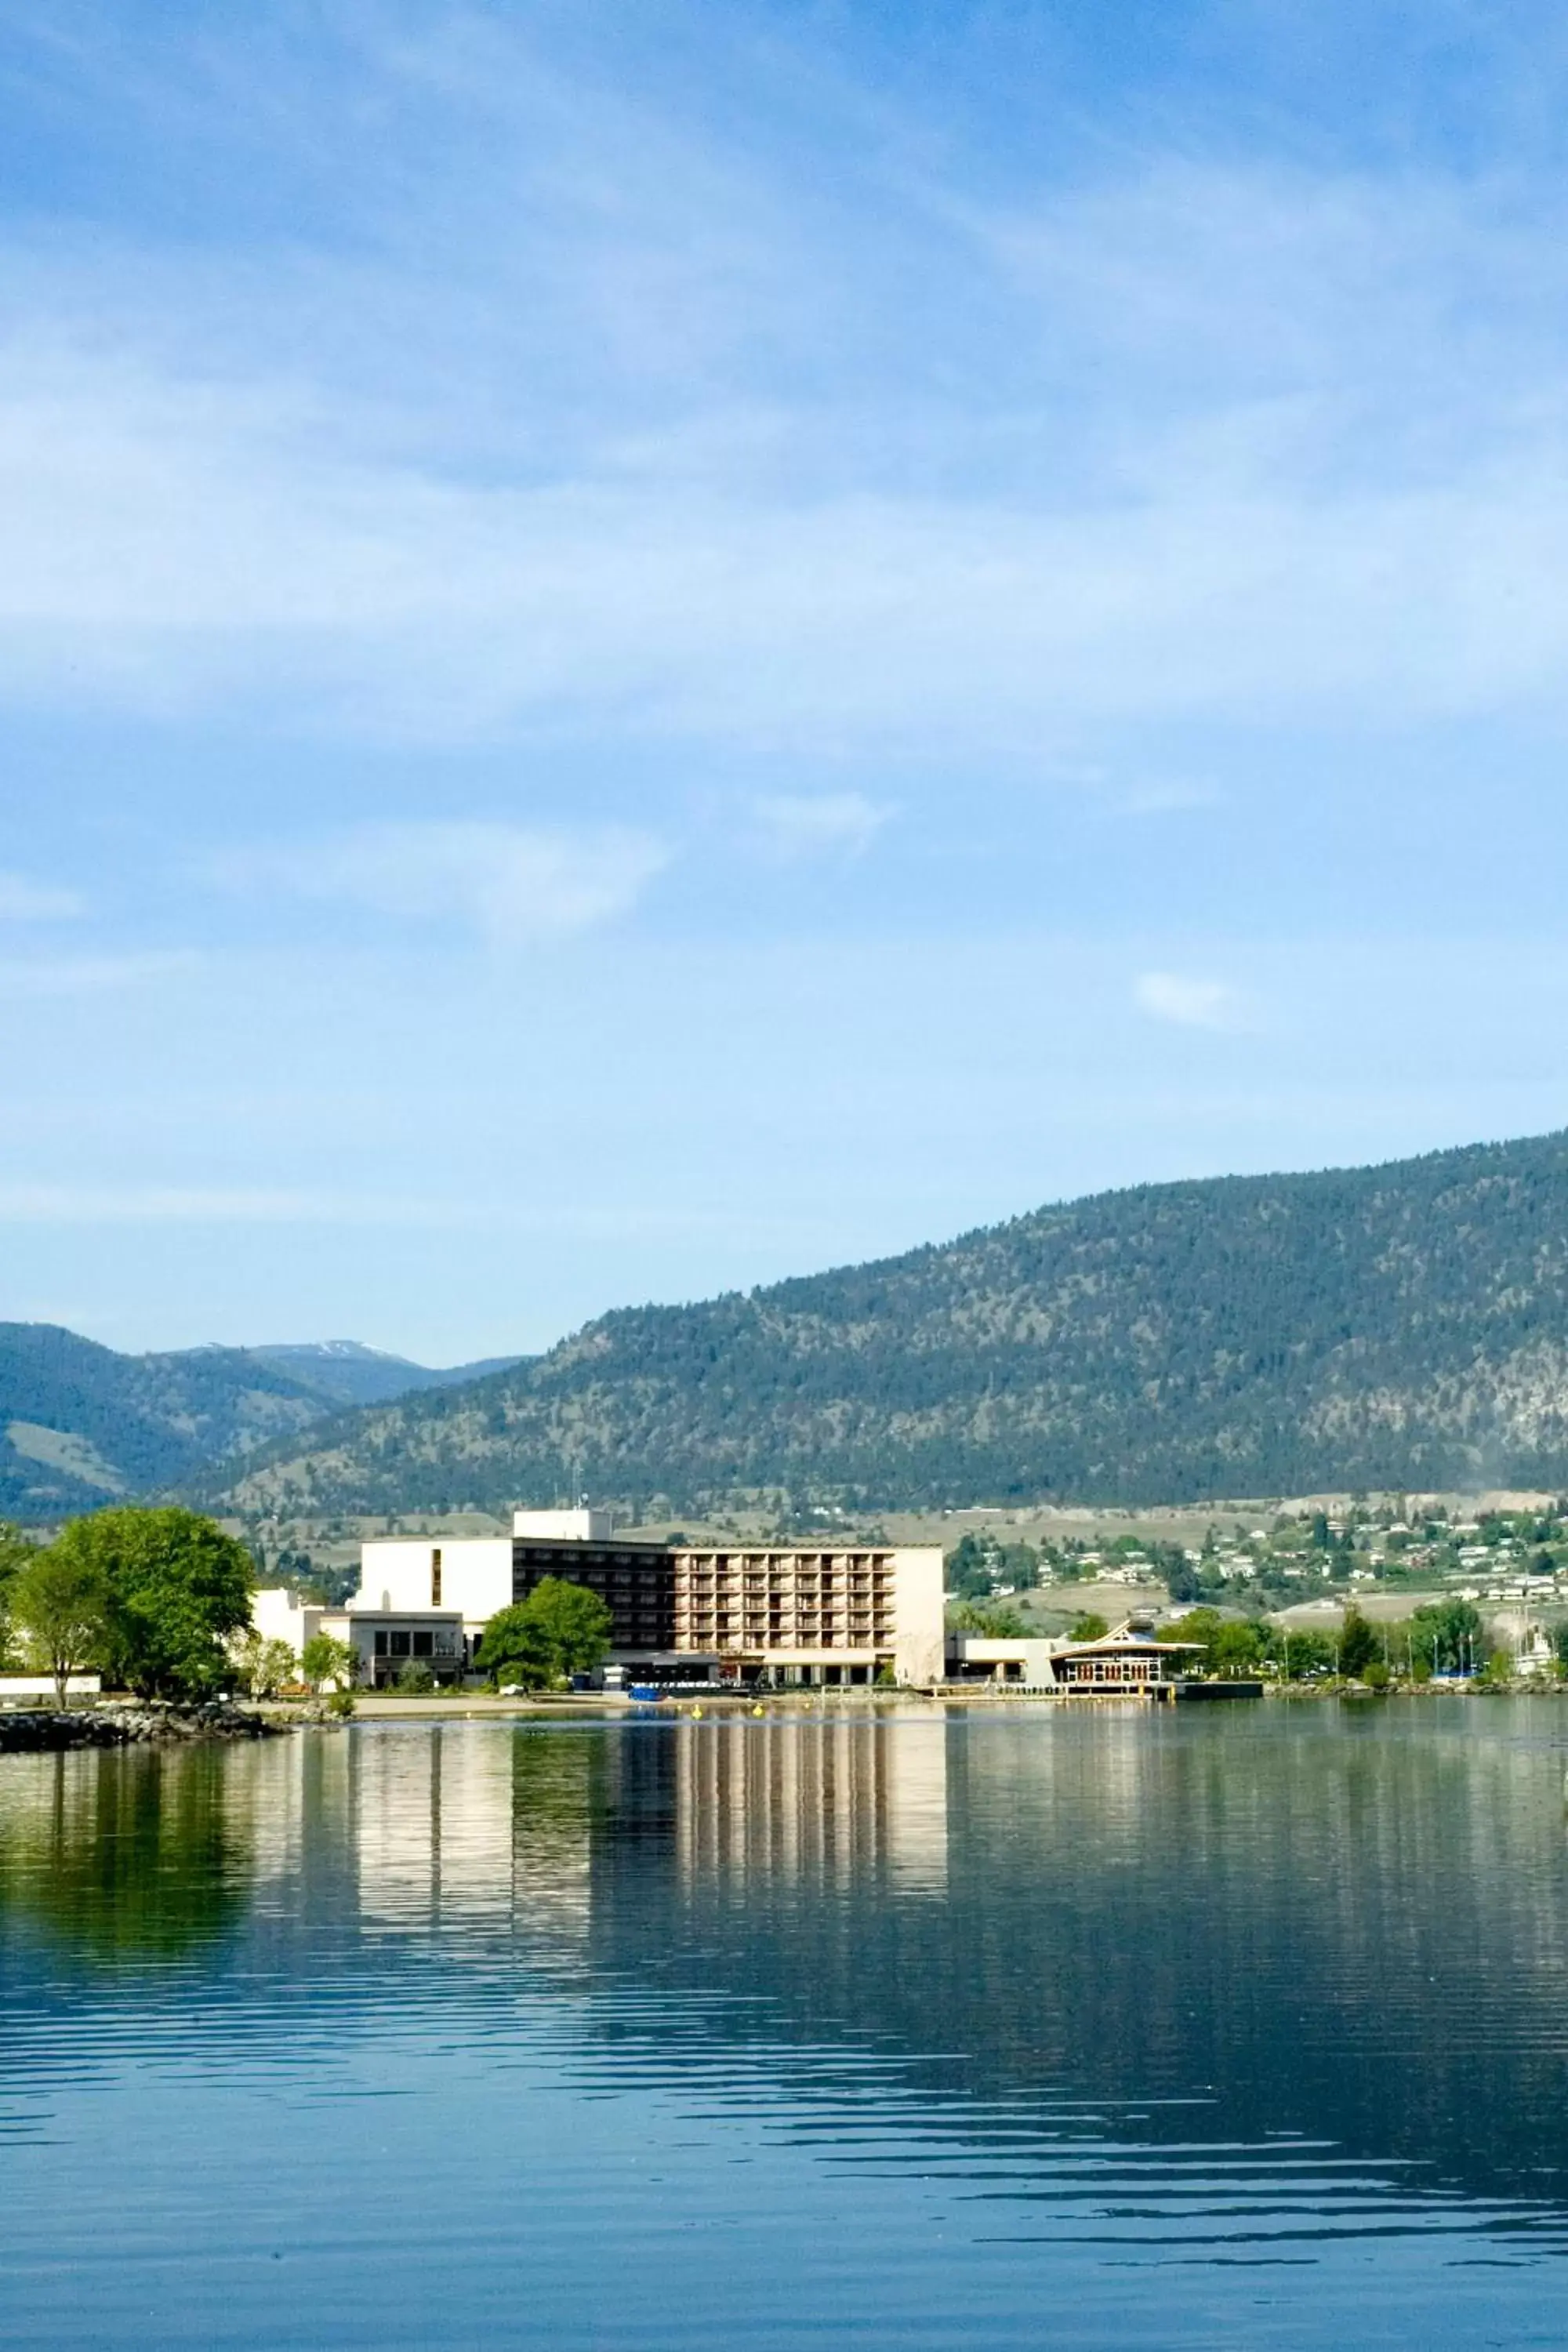 Area and facilities in Penticton Lakeside Resort